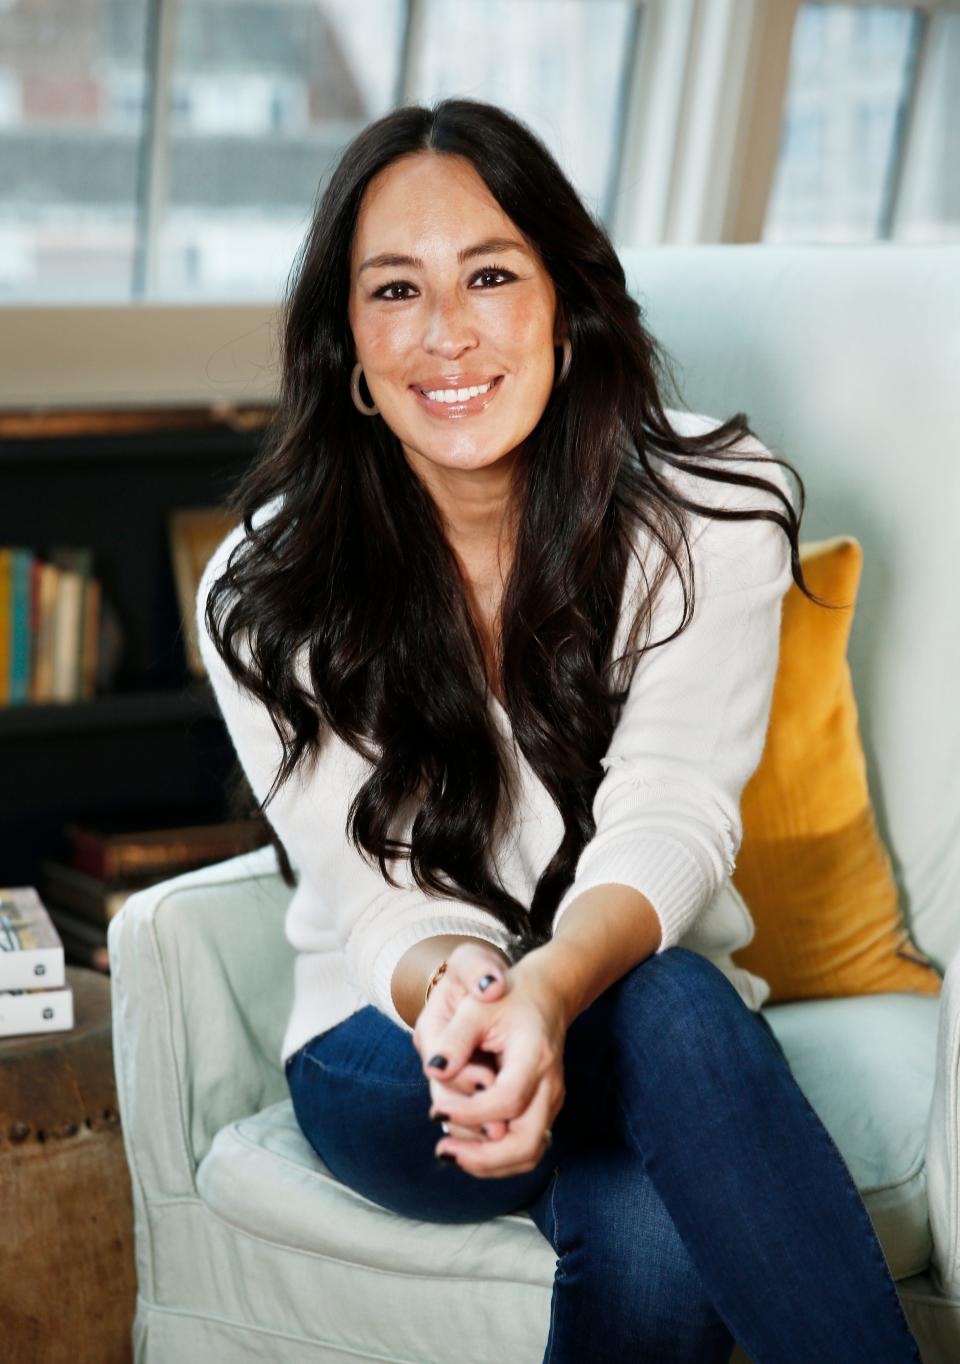 While Joanna Gaines, photographed in 2018,  previously strove for perfection as a way to assuage her insecurities, today she is confident about her self-worth.